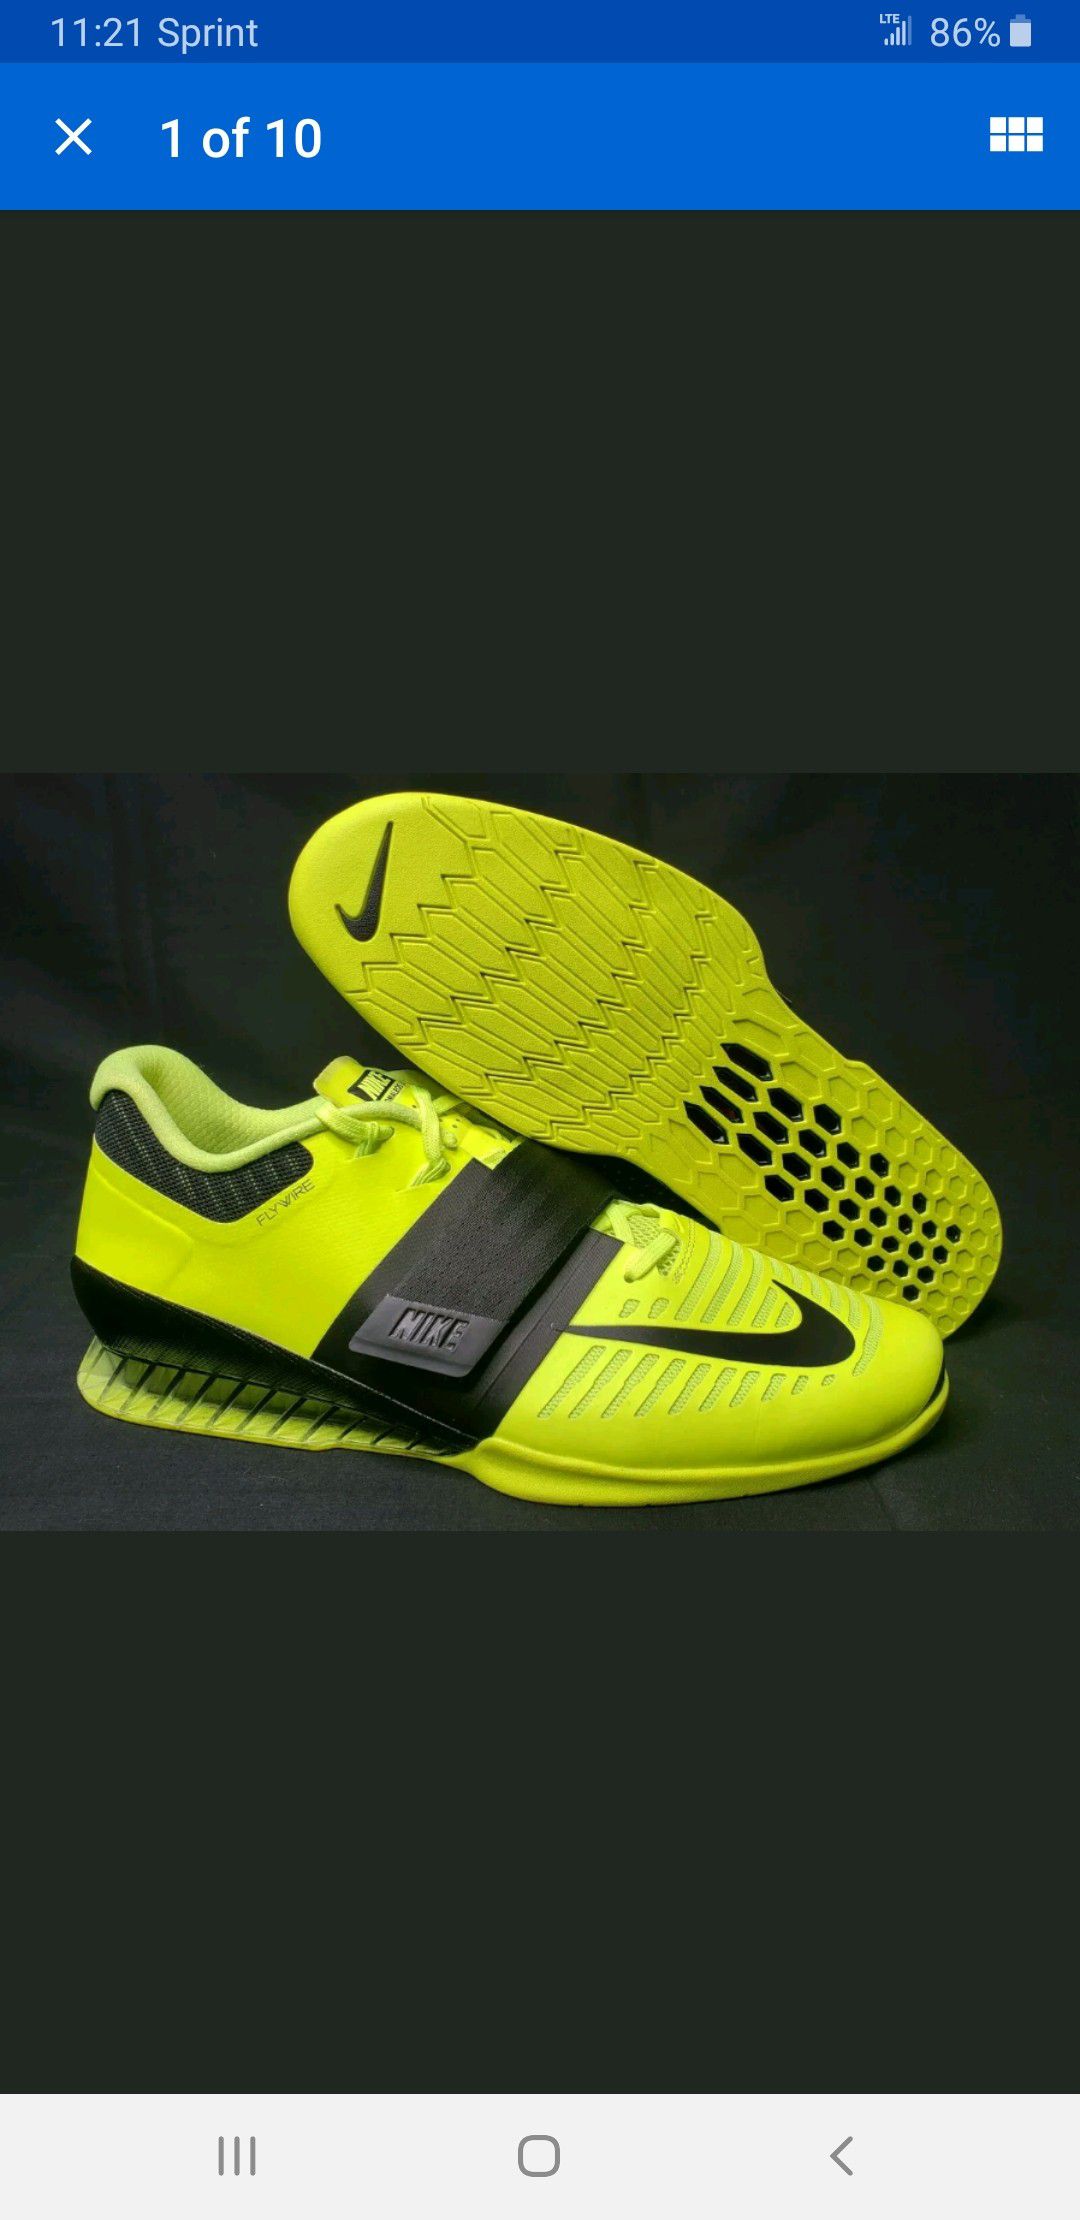 Mens Nike Romaleos Weight Lifting Shoes Volt/Black 852933-700 US Size 15 for Sale in Milpitas, CA - OfferUp